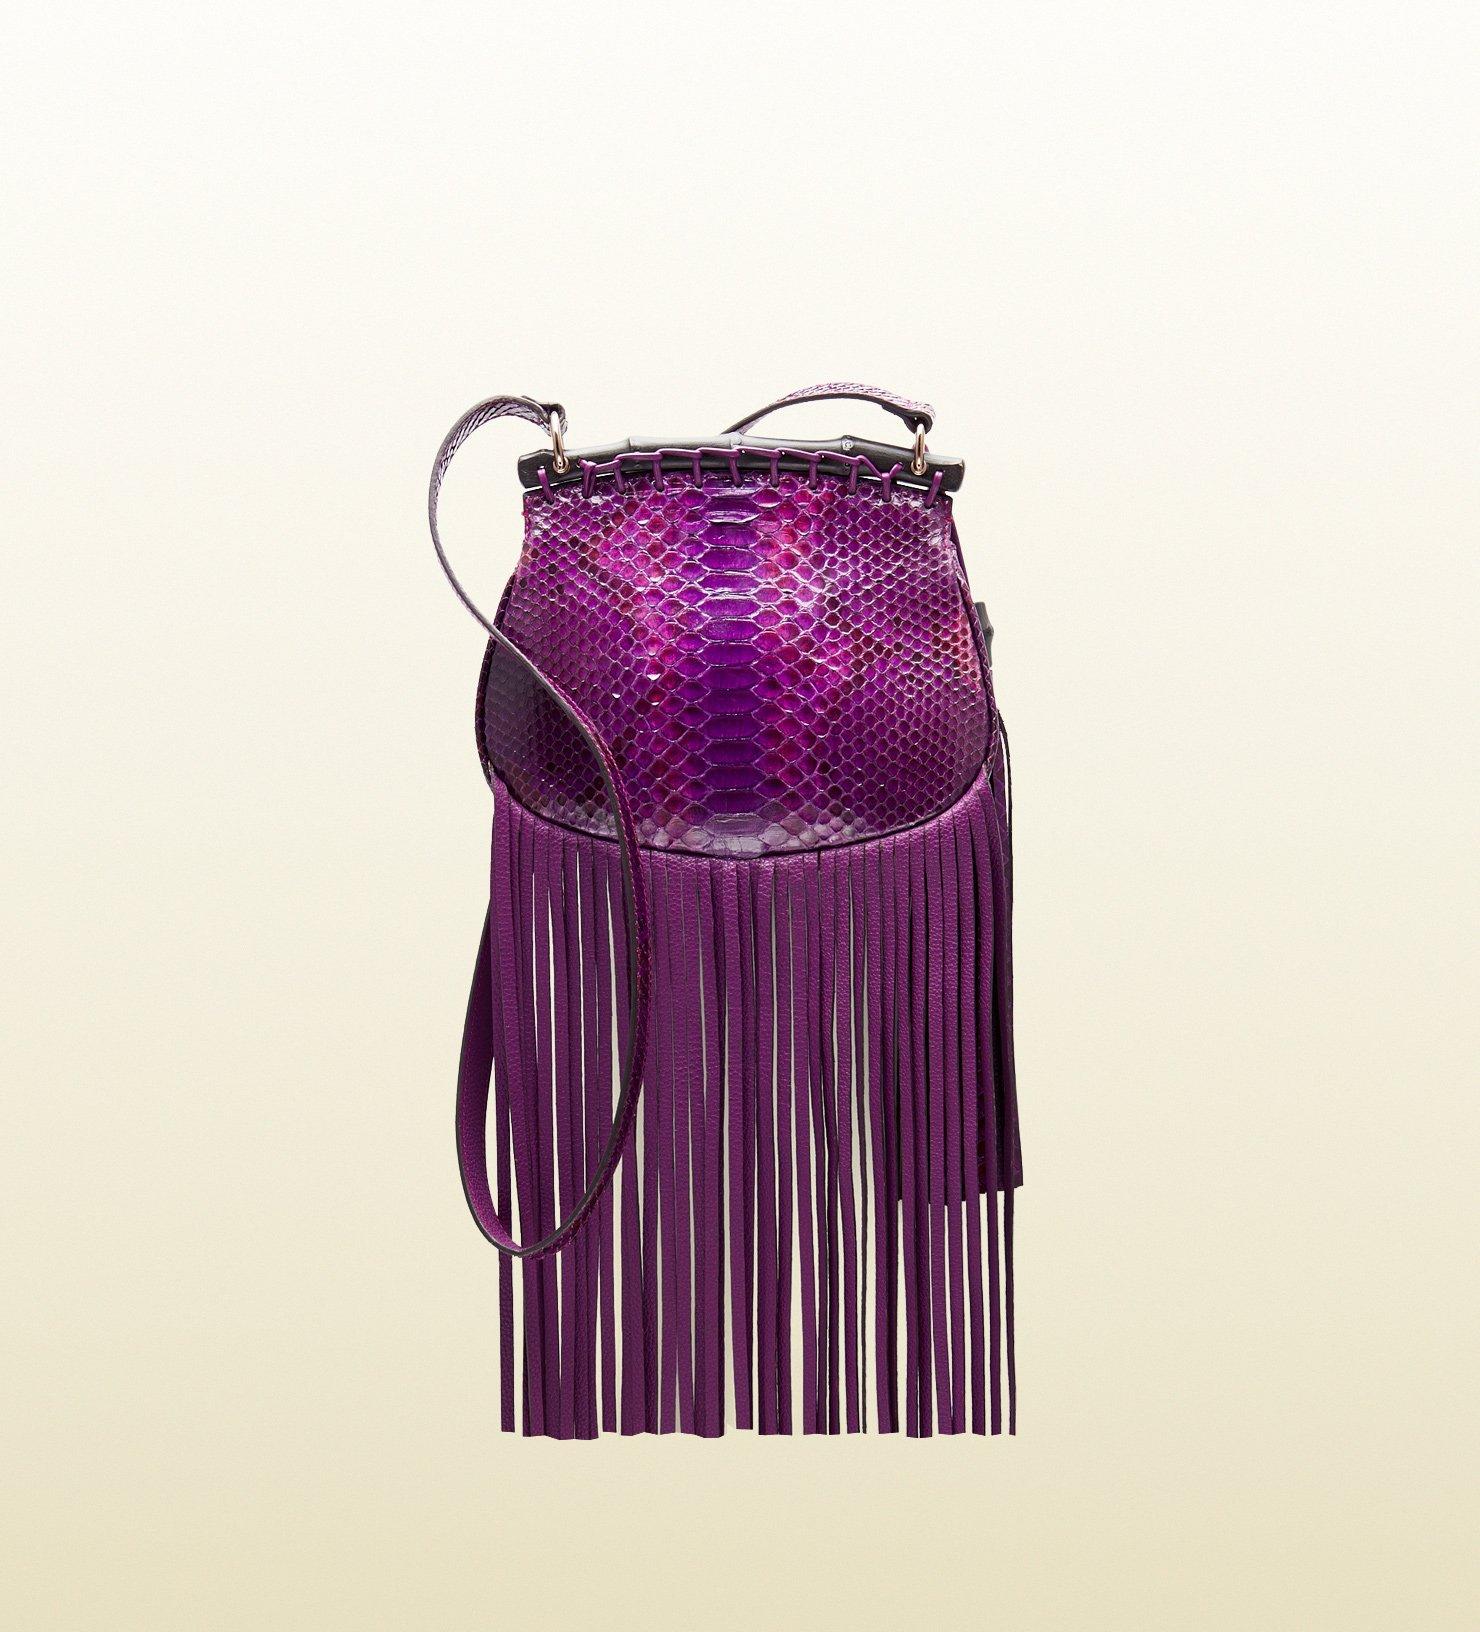 New Gucci Nouveau Python Fringe Bamboo Runway Bag in Plum $3100 7